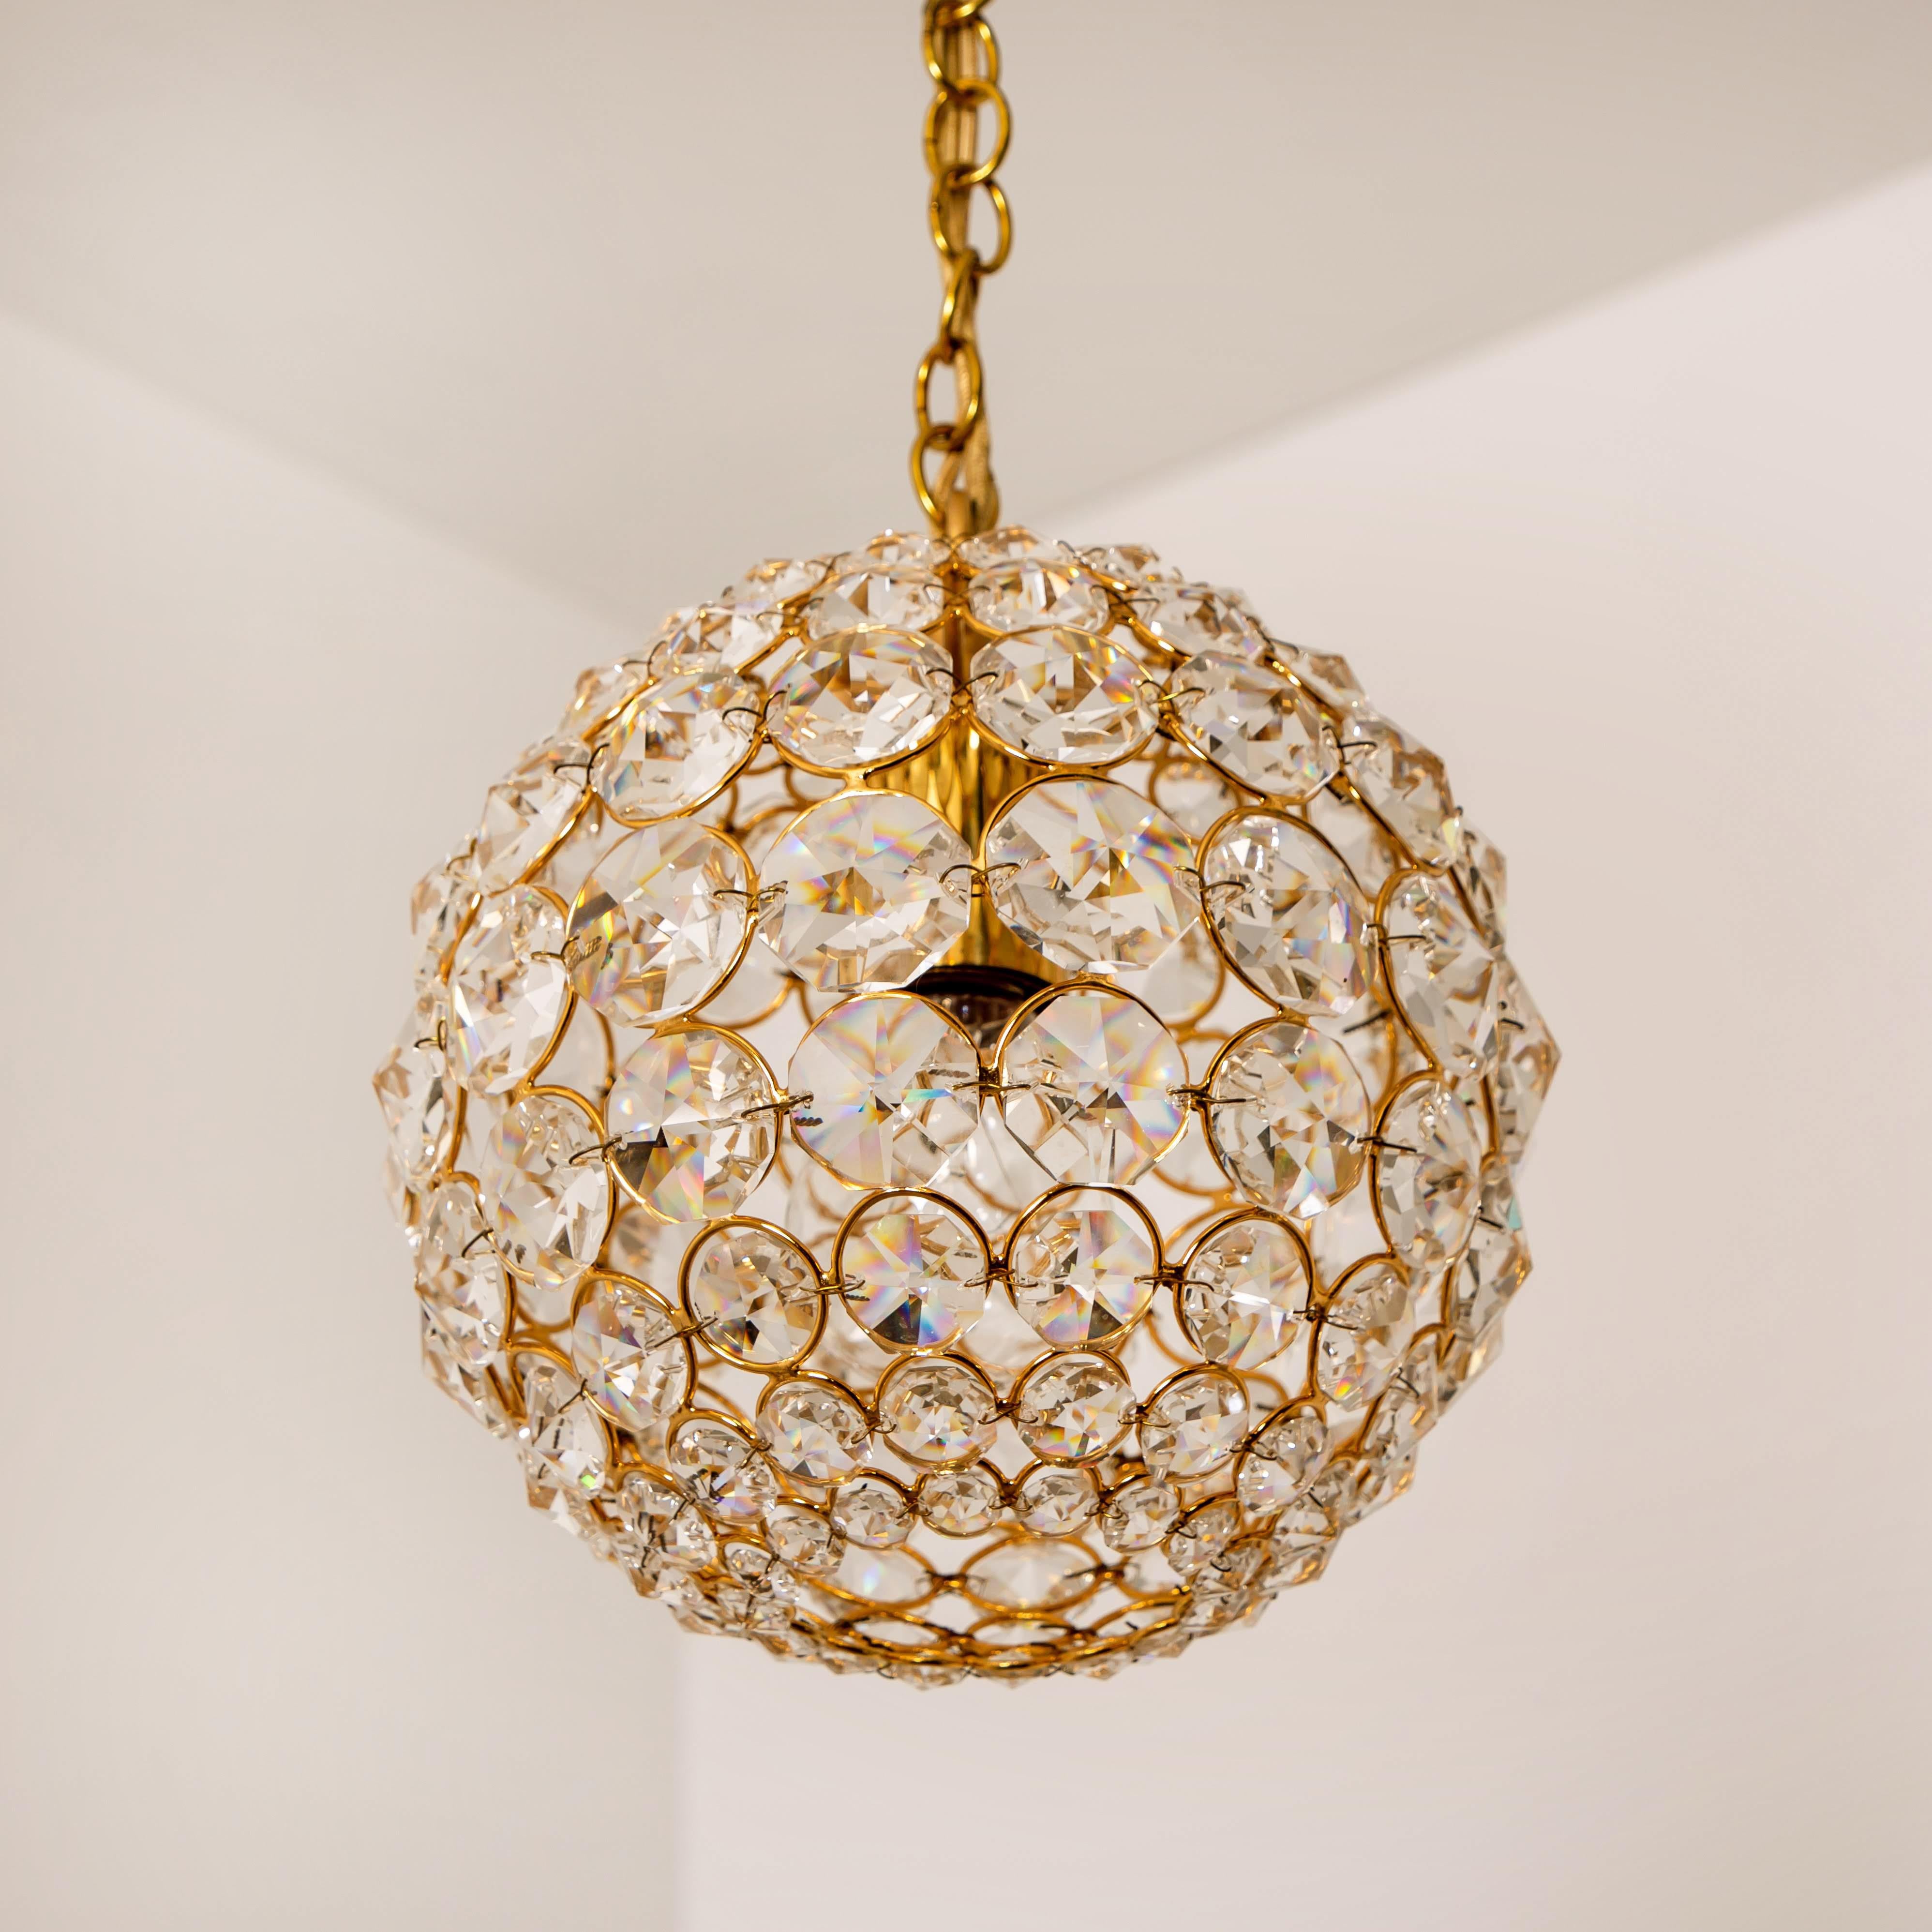 Small Gold-Plated Brass and Crystal Pendant Lamp from Palwa, 1960s 4